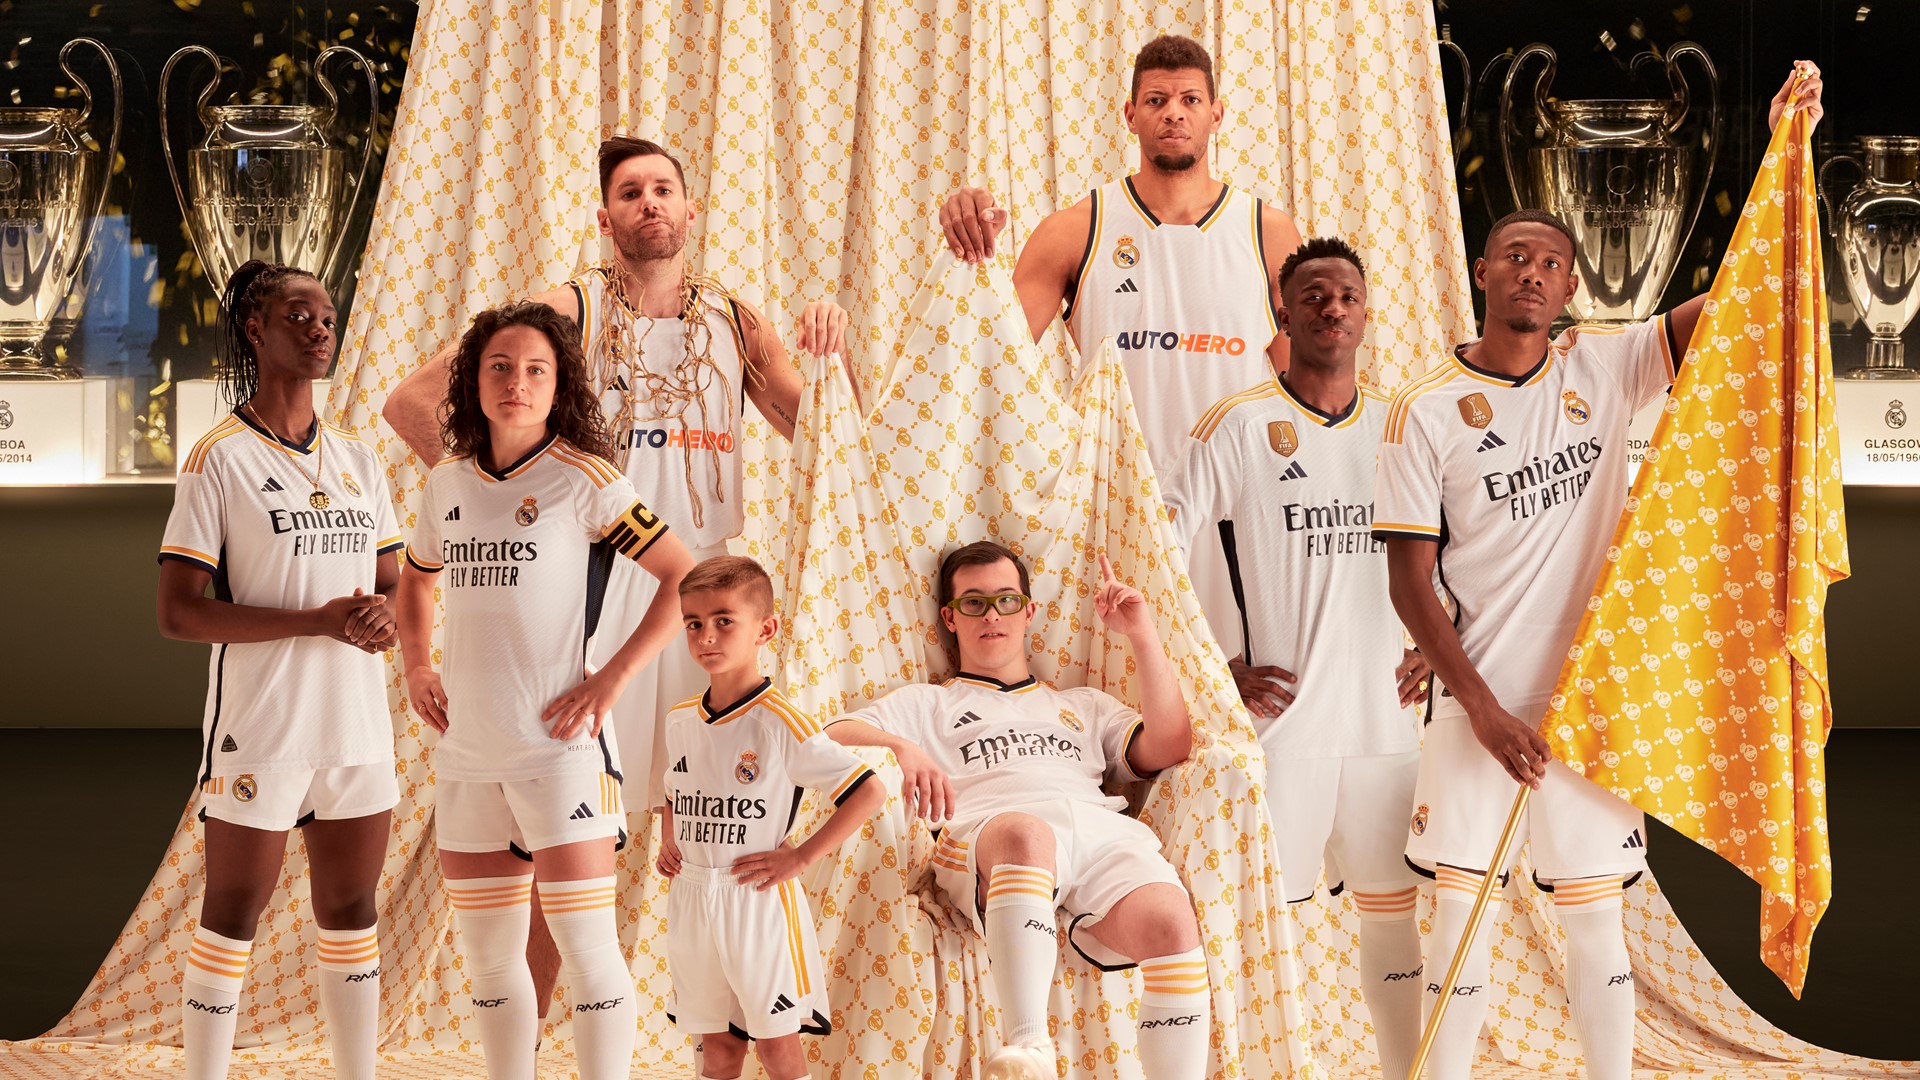 Do you like Real Madrid? Real Madrid jersey purchase recommendation